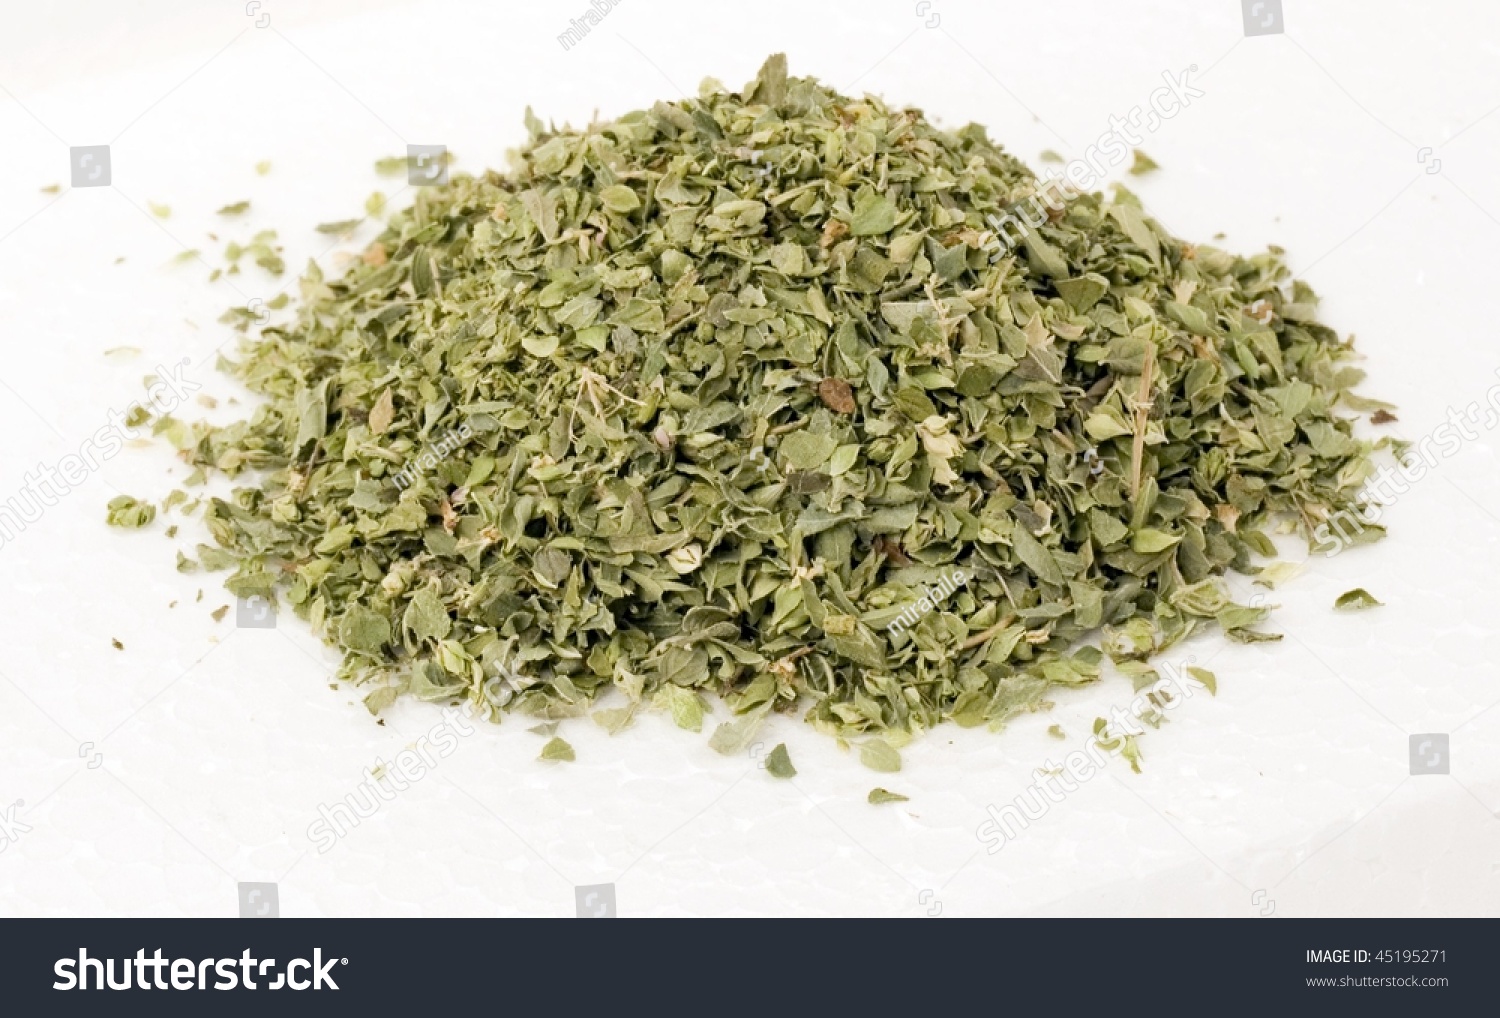 Pile Of Dried Oregano Leaves On A White Background Stock ...